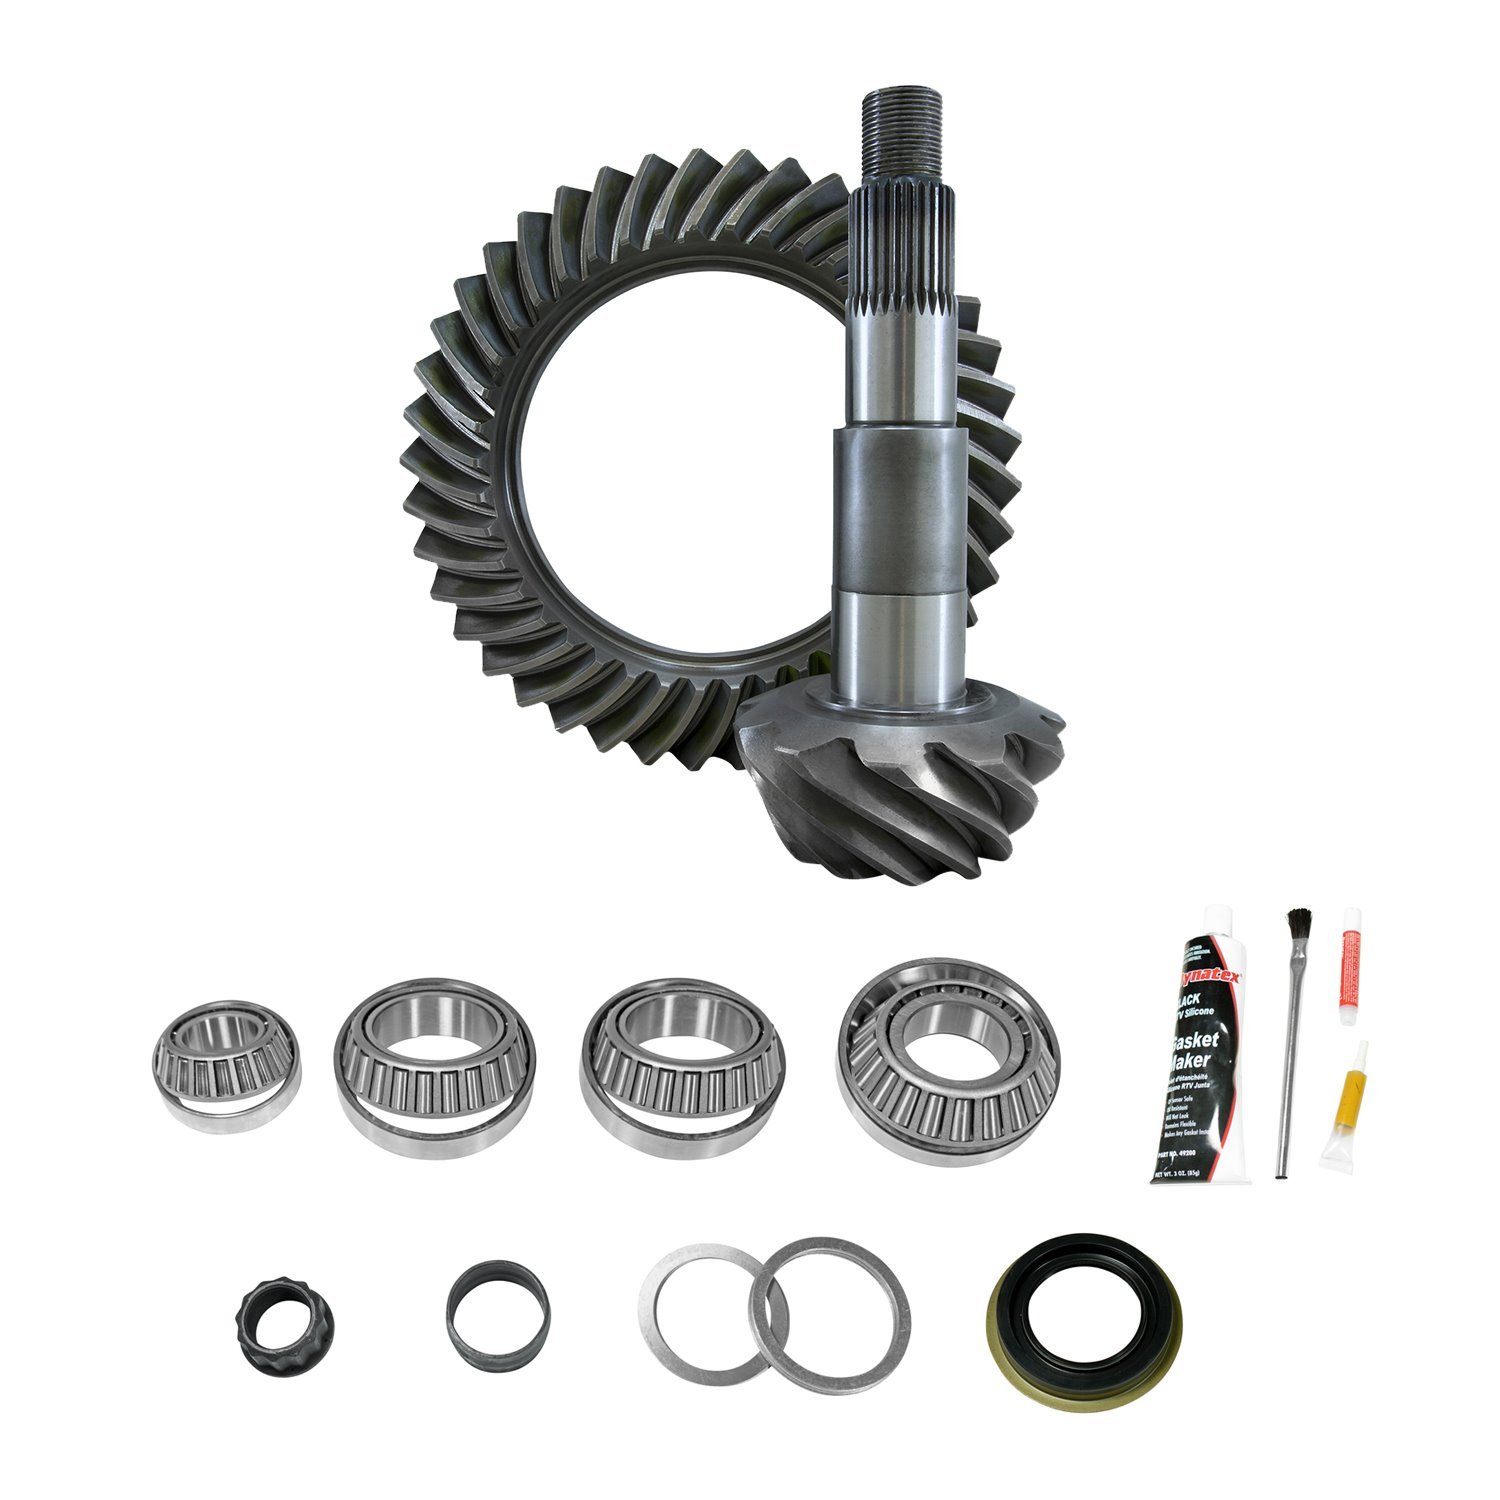 AAM115B1001 Ring & Pinion w/Installation Kit Bundle for 2010-2019 GM, Ram 2500, 3500 Trucks 11.5 AAM Differentials [3.73 Ratio]